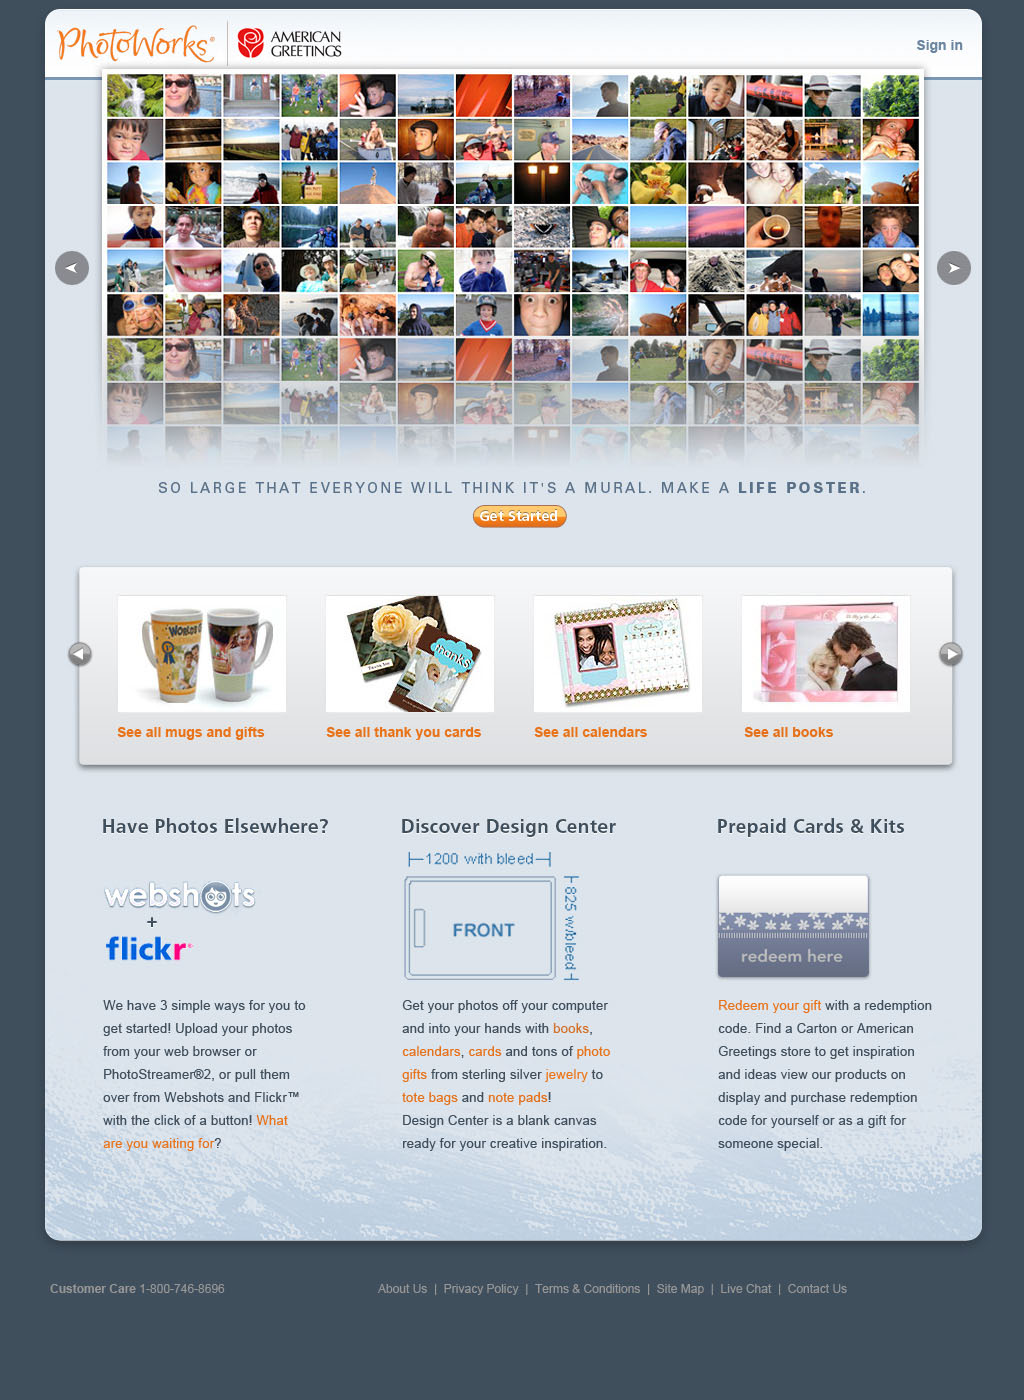 Landing page showing the life poster promotion